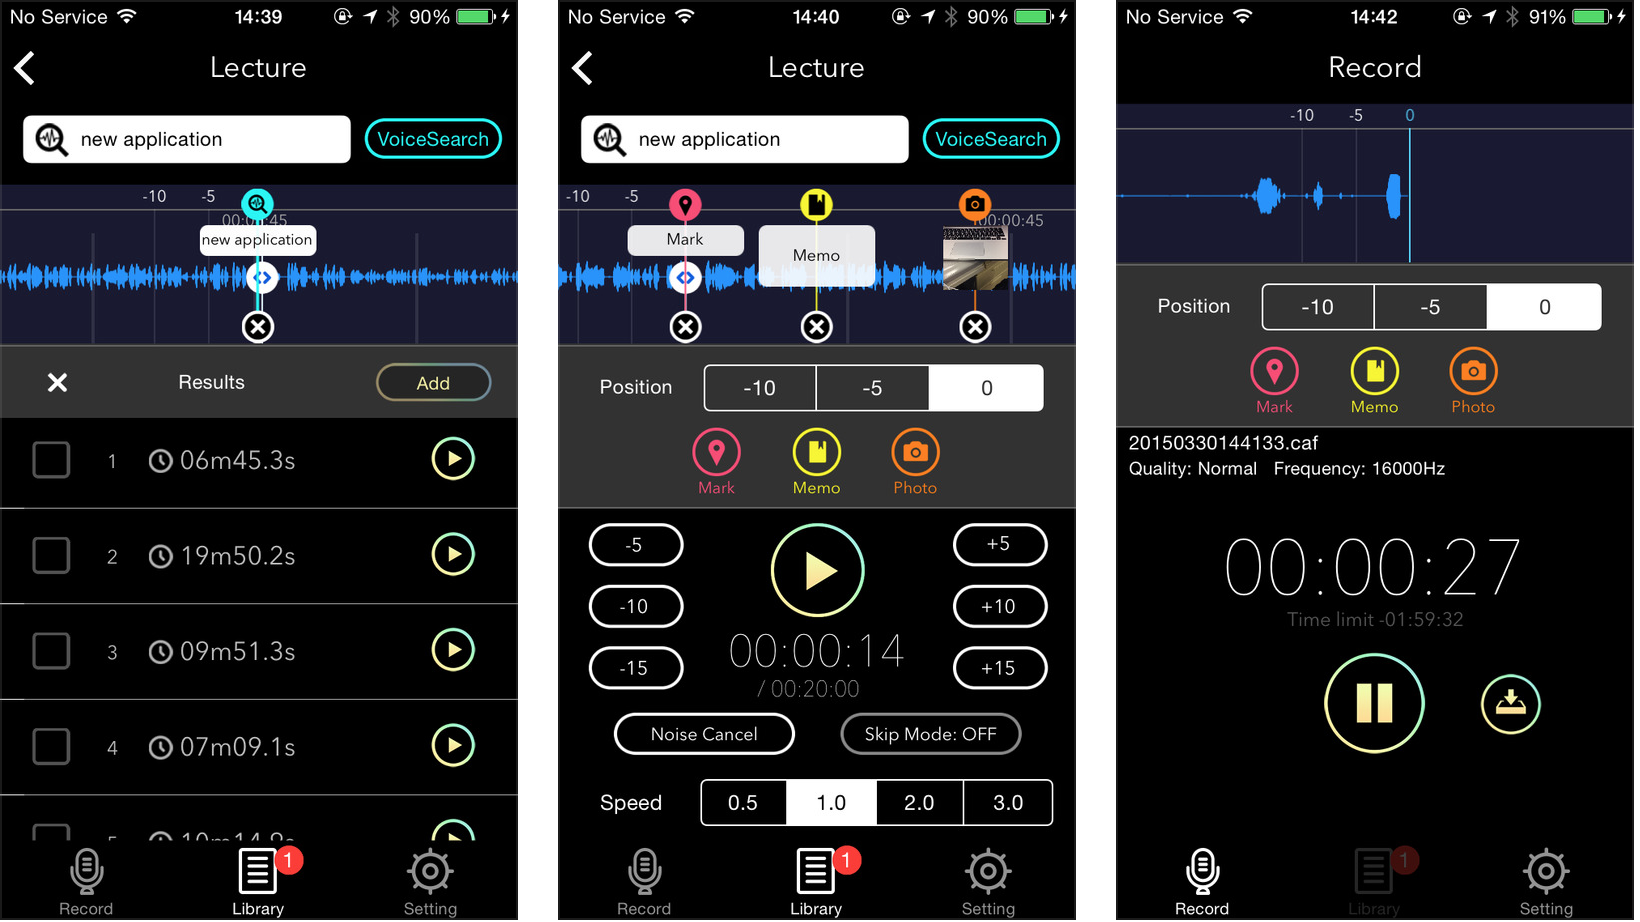 Casio's iPhone app searches for keywords in voice recordings | PCWorld